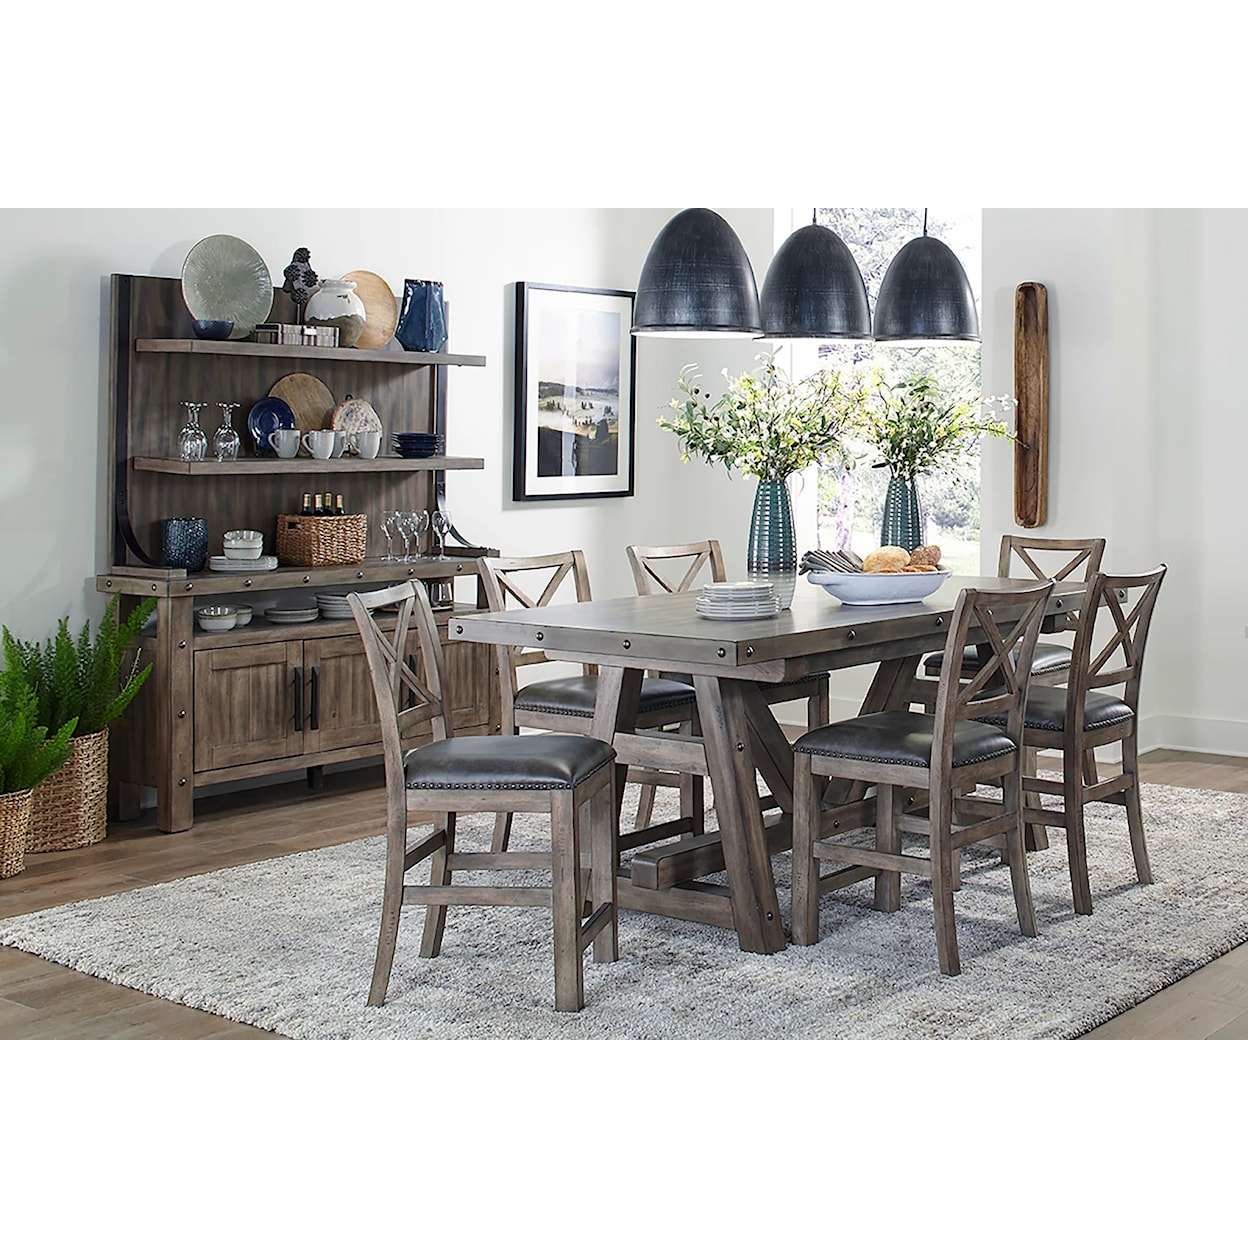 Paramount Furniture Lodge 10-Piece Counter Height Table Set